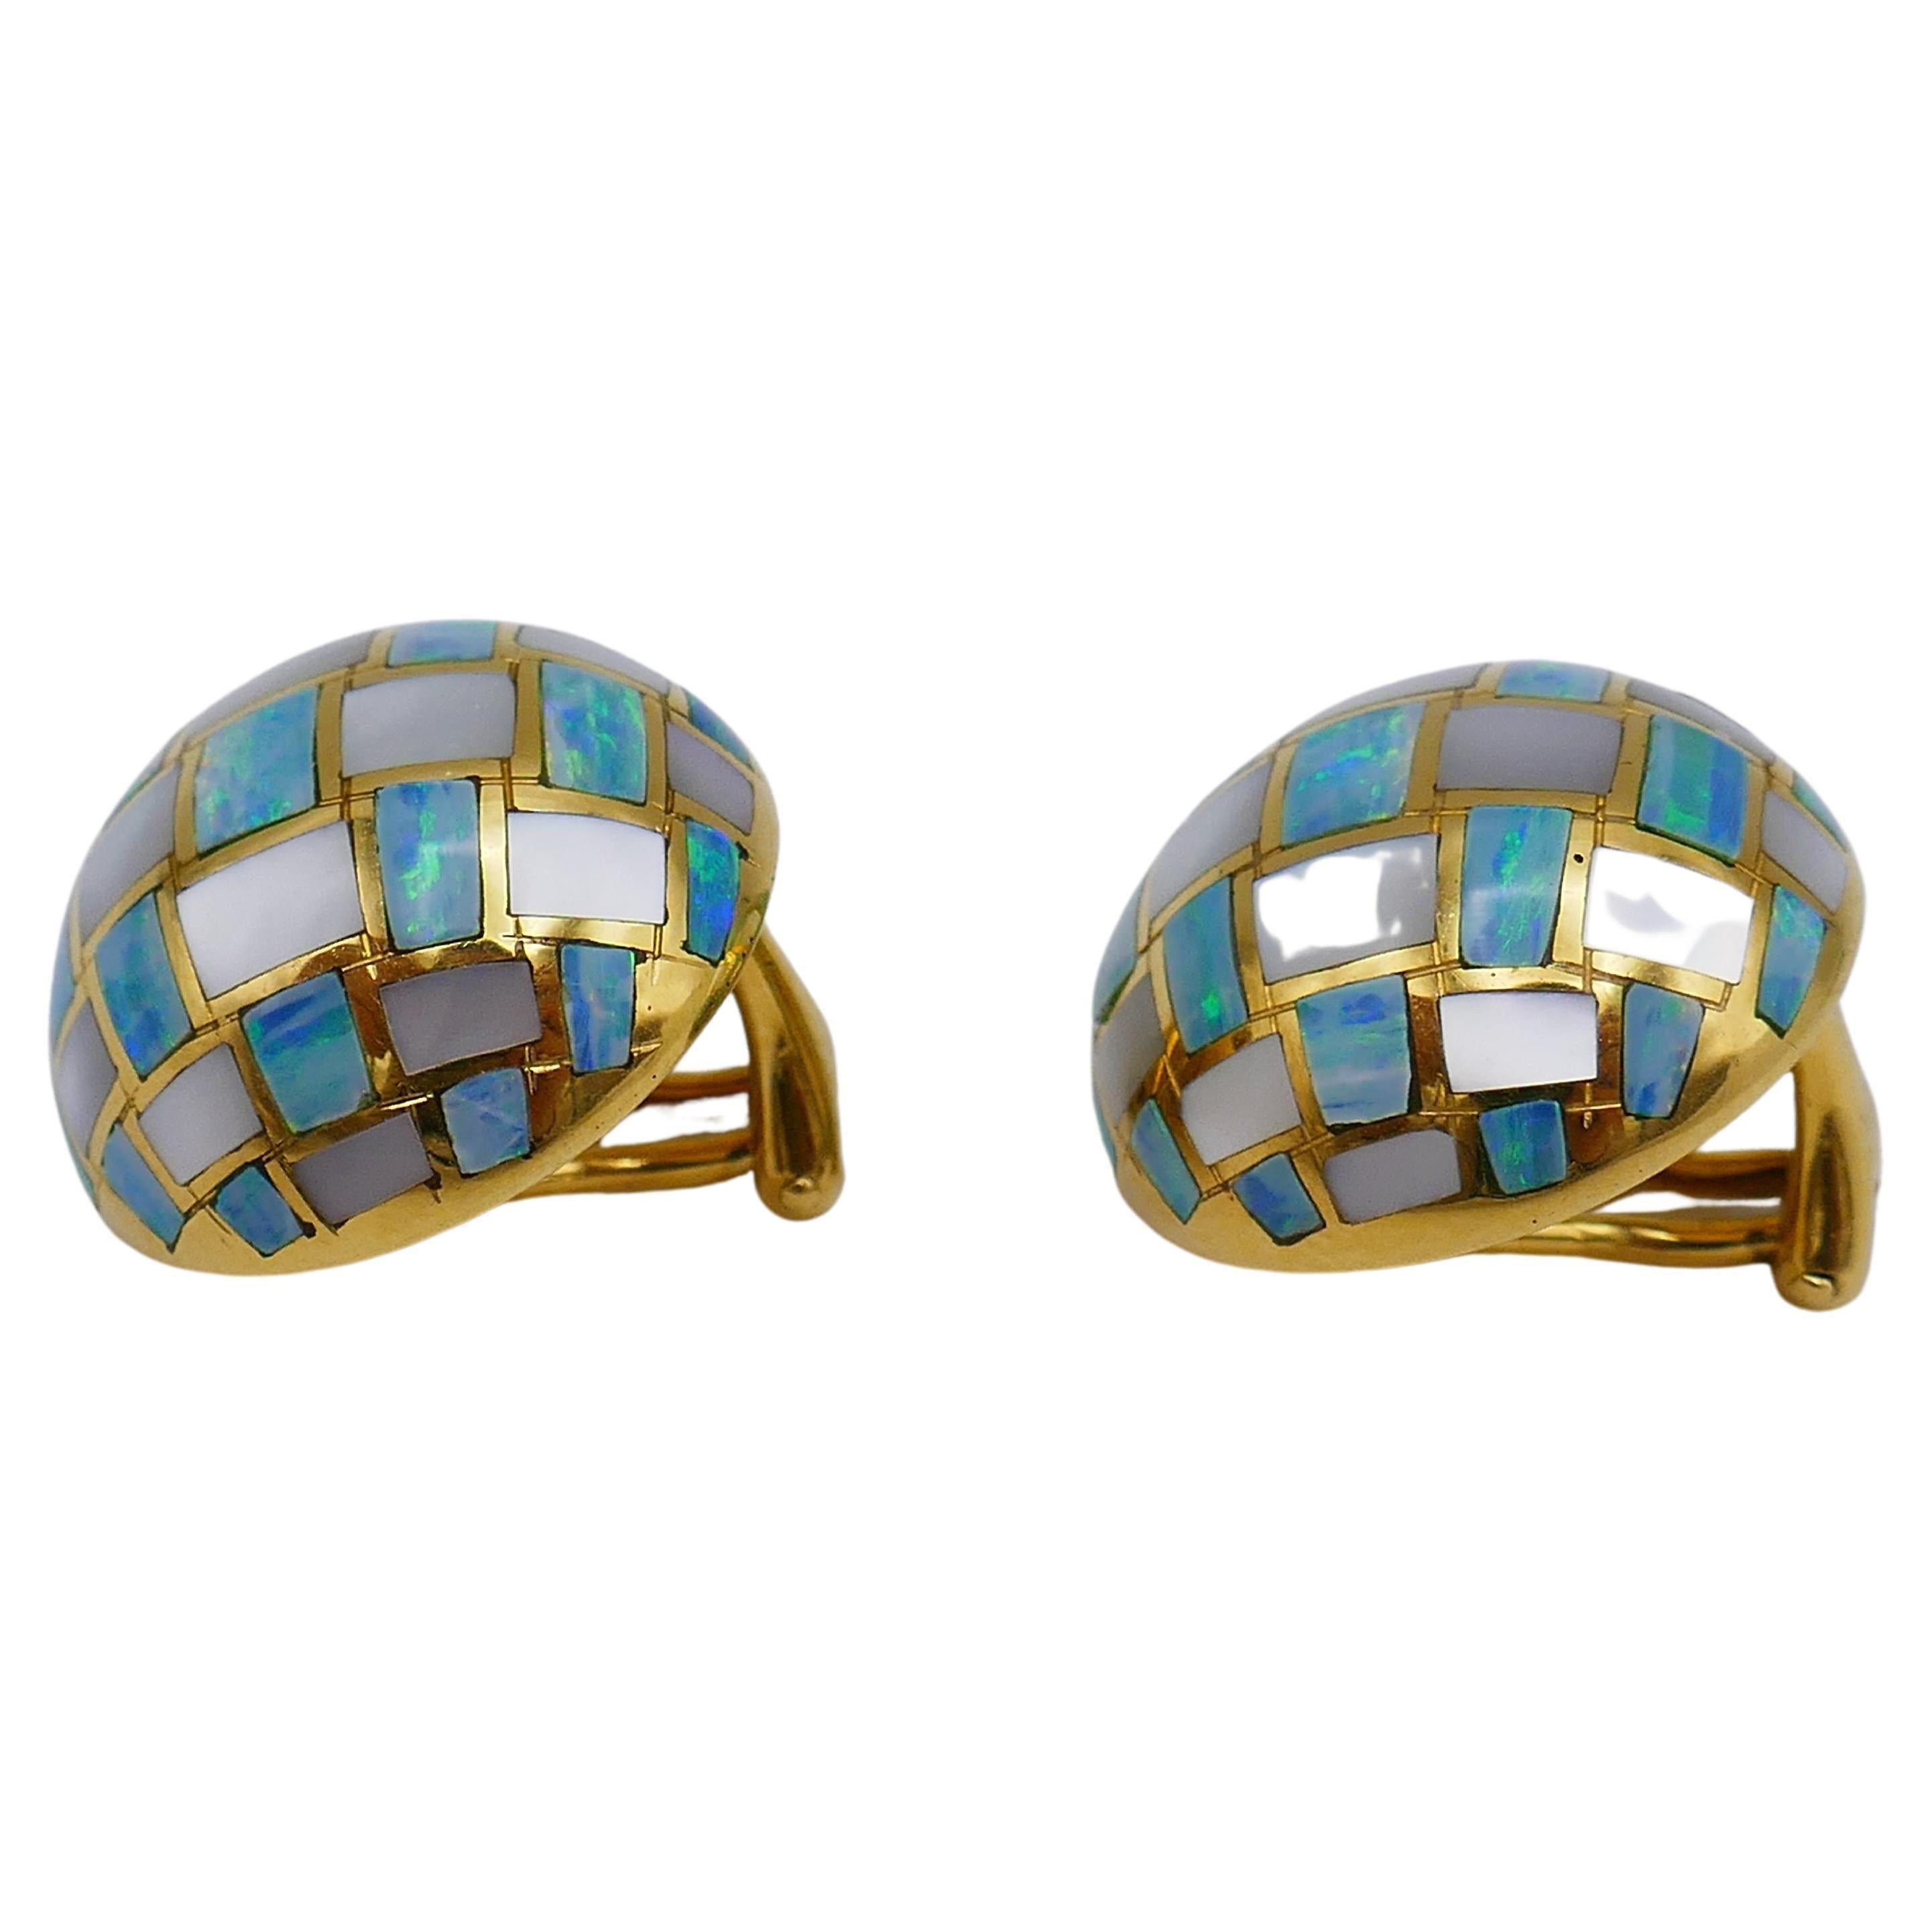 A pair of vintage (c. 1980s) yellow gold mother-of-pearl dome earrings with inlaid opal. Stamped with  Tiffany & Co. maker's mark and a hallmark for 18k gold. 
Measurements: the diameter is 13.6 grams. The weight is 13.6 grams